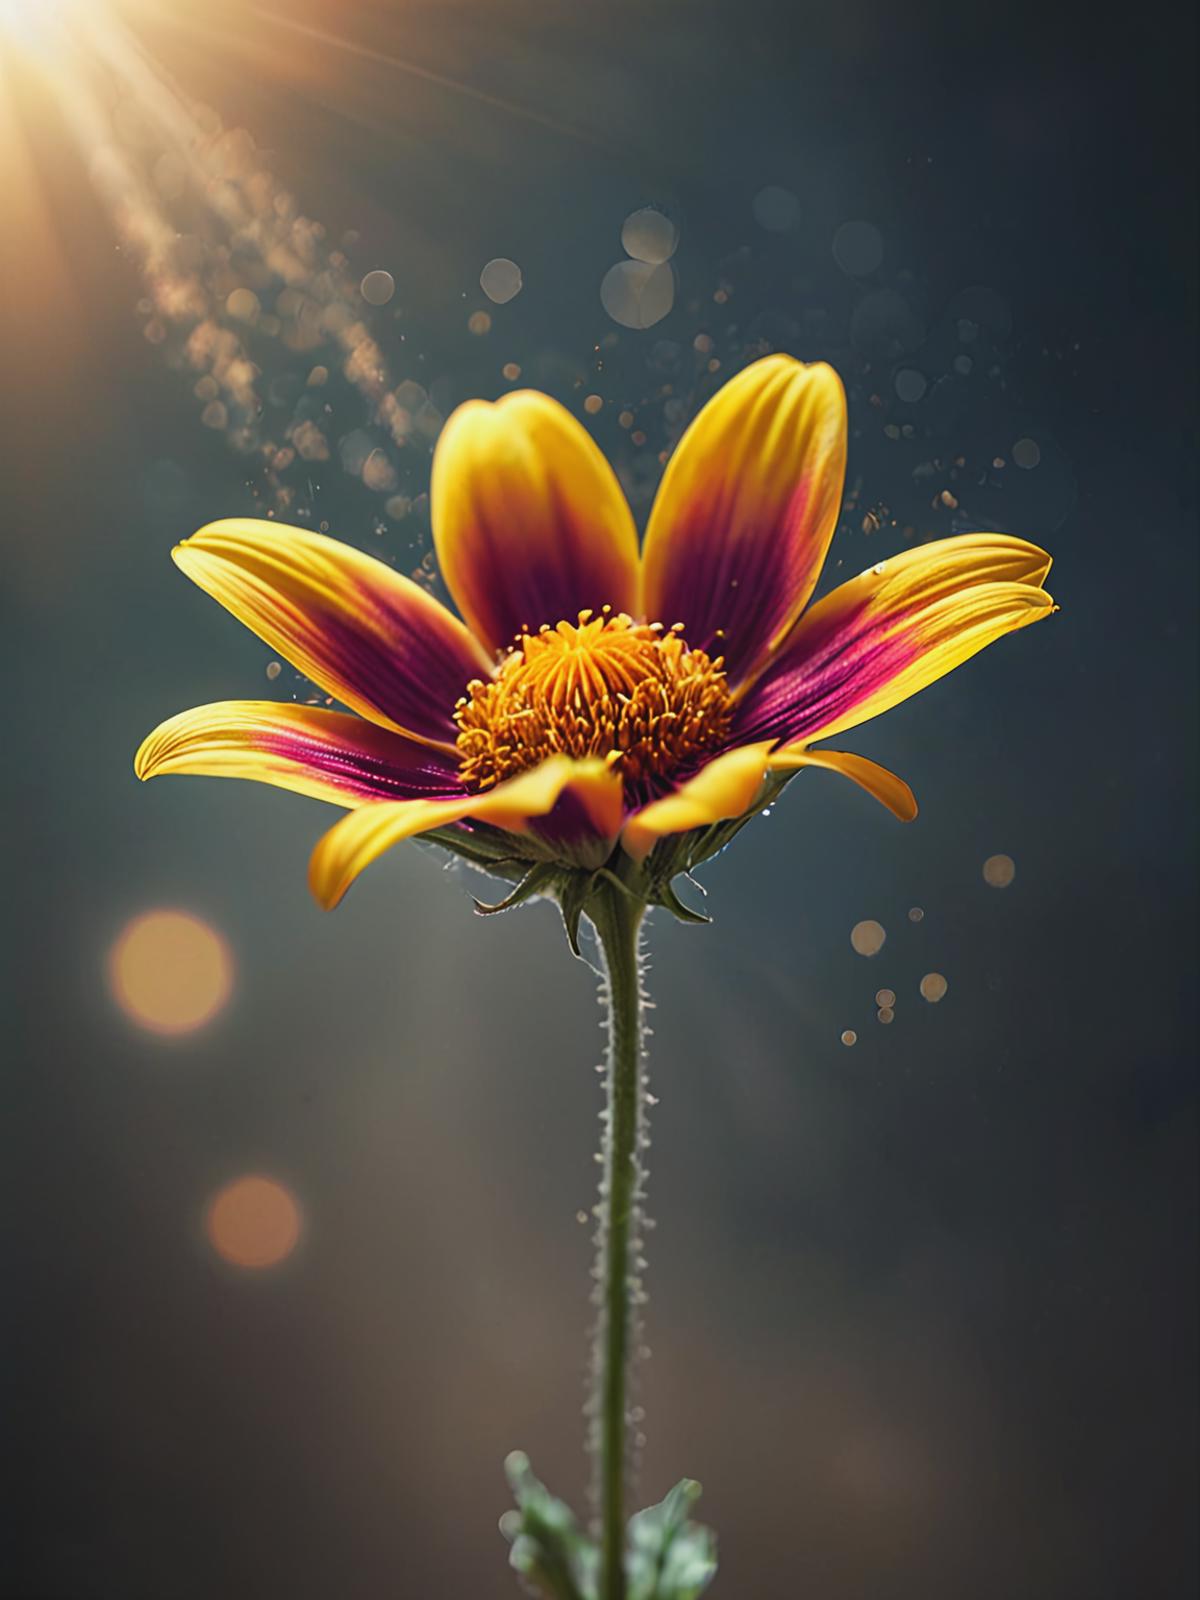 A yellow and purple flower with yellow petals and a brown center.